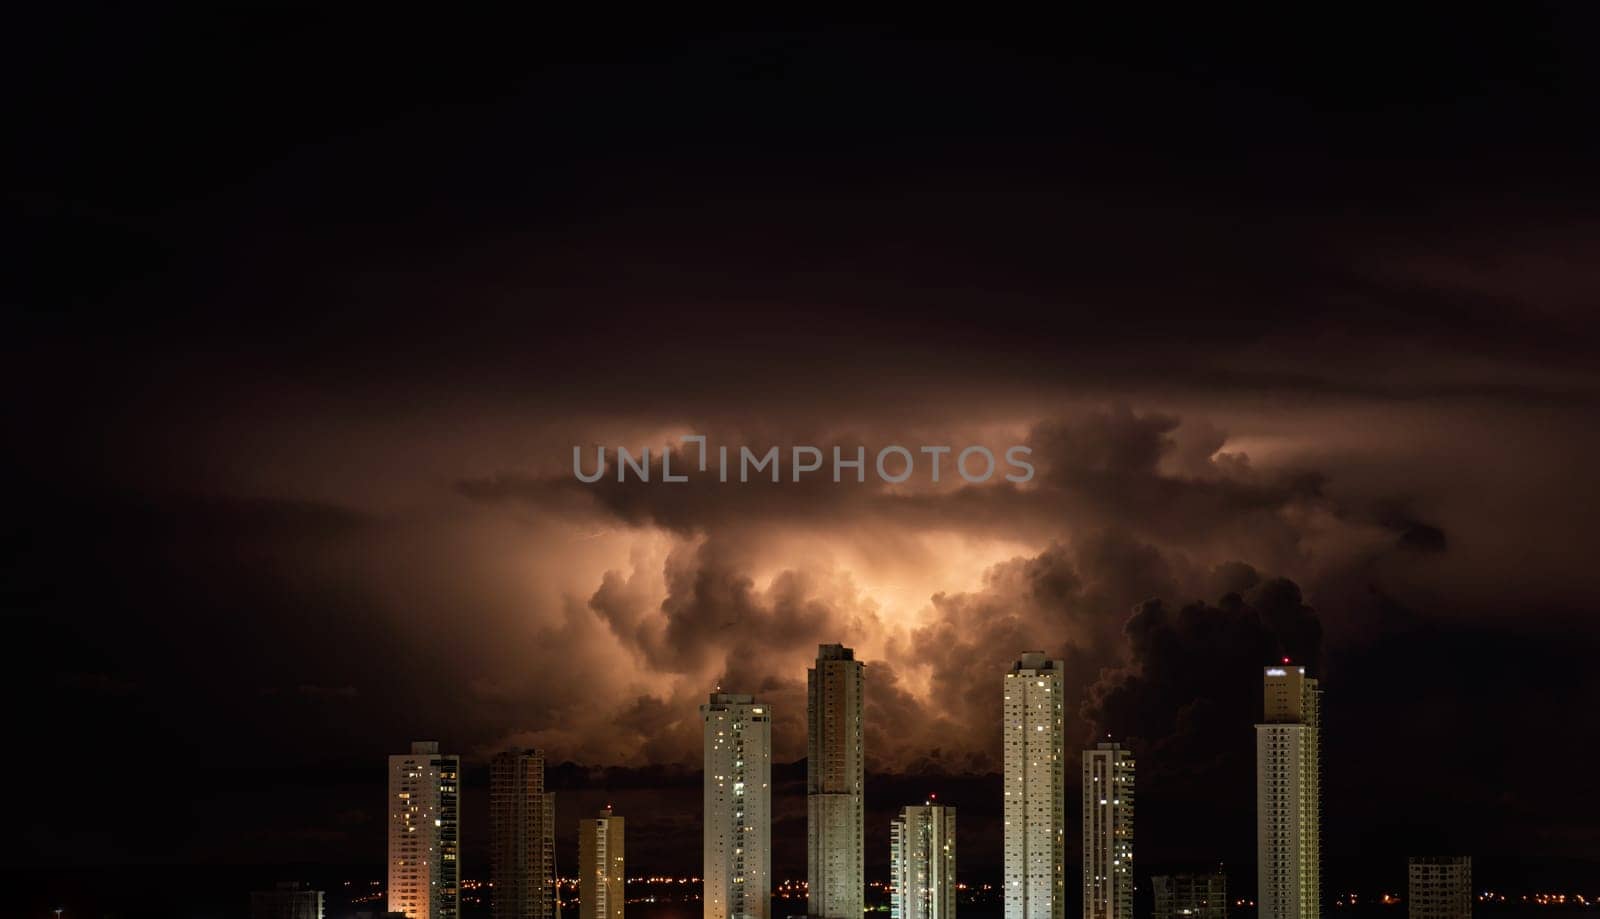 Dramatic orange storm clouds break through the night sky and hover over a city skyline of towering skyscrapers, creating a stunning contrast between light and dark. Copy space available.